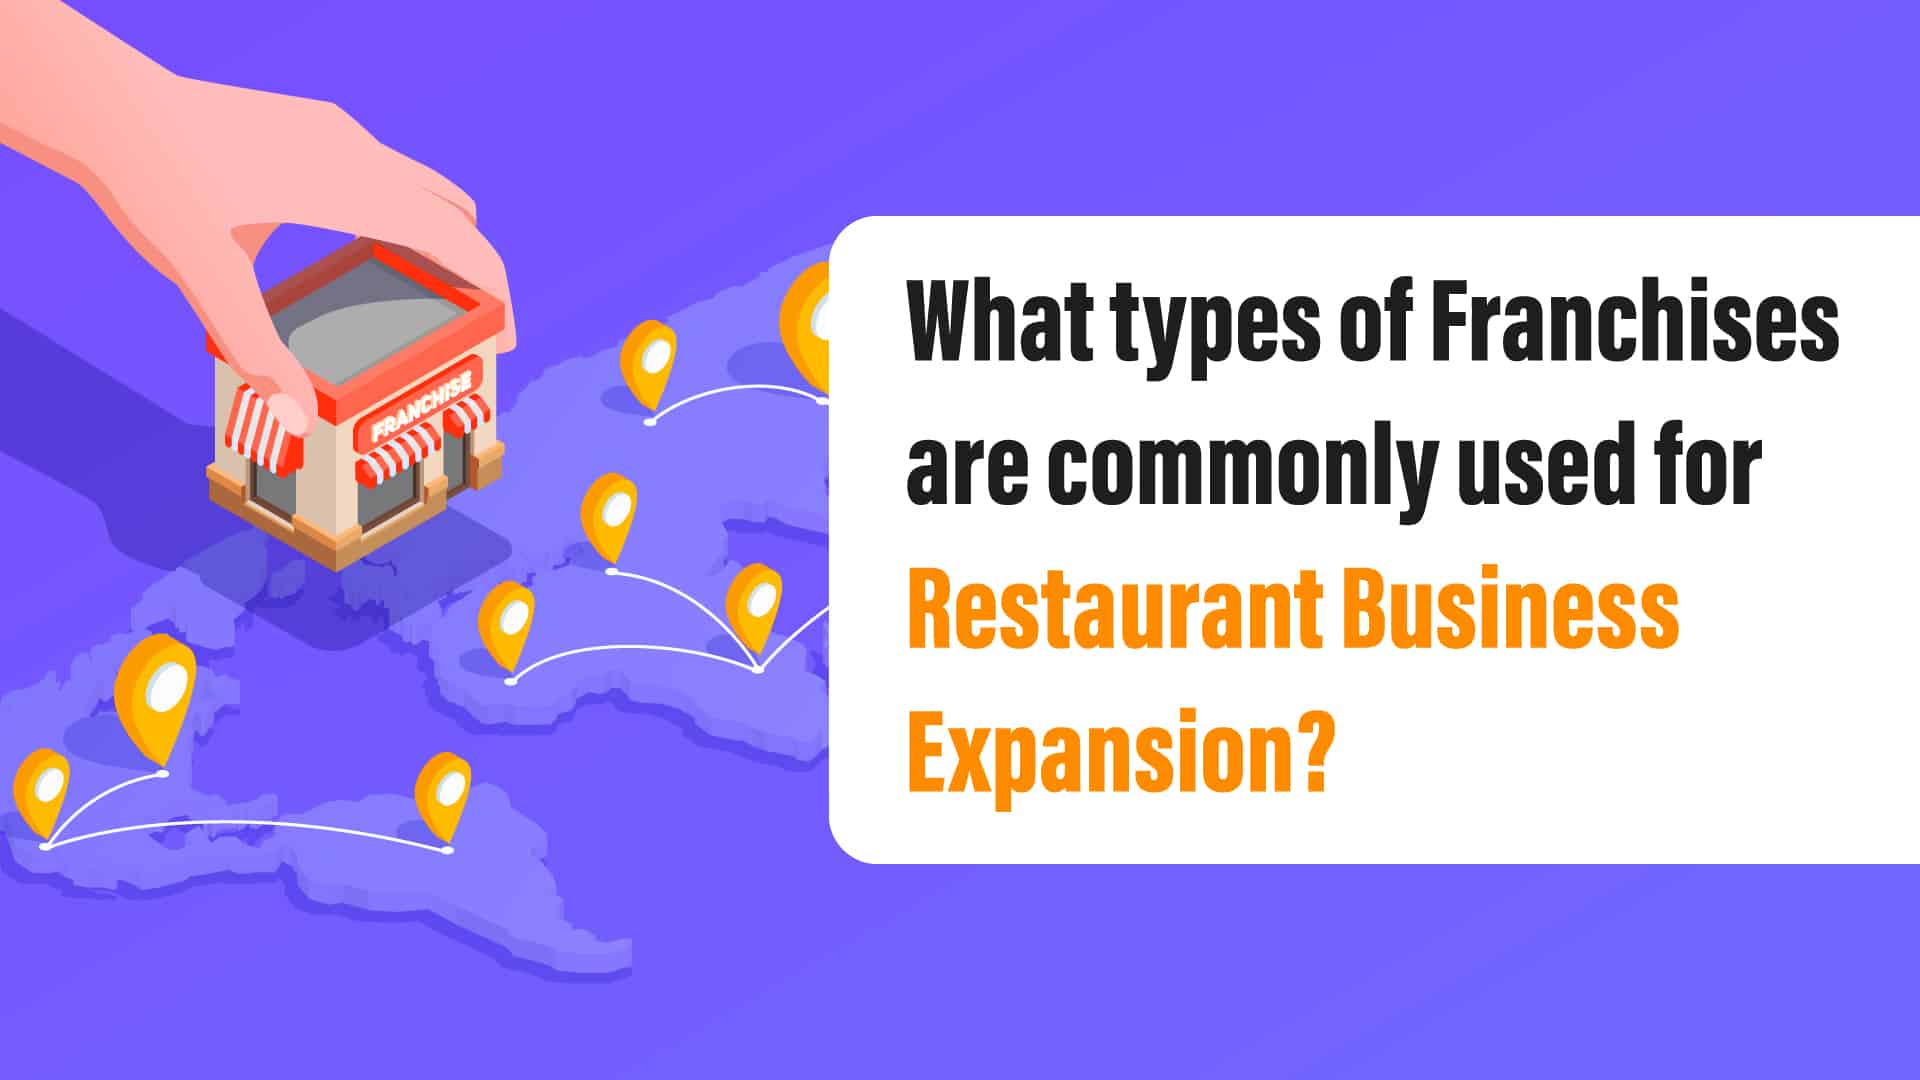 What types of franchises are commonly used for restaurant business expansion